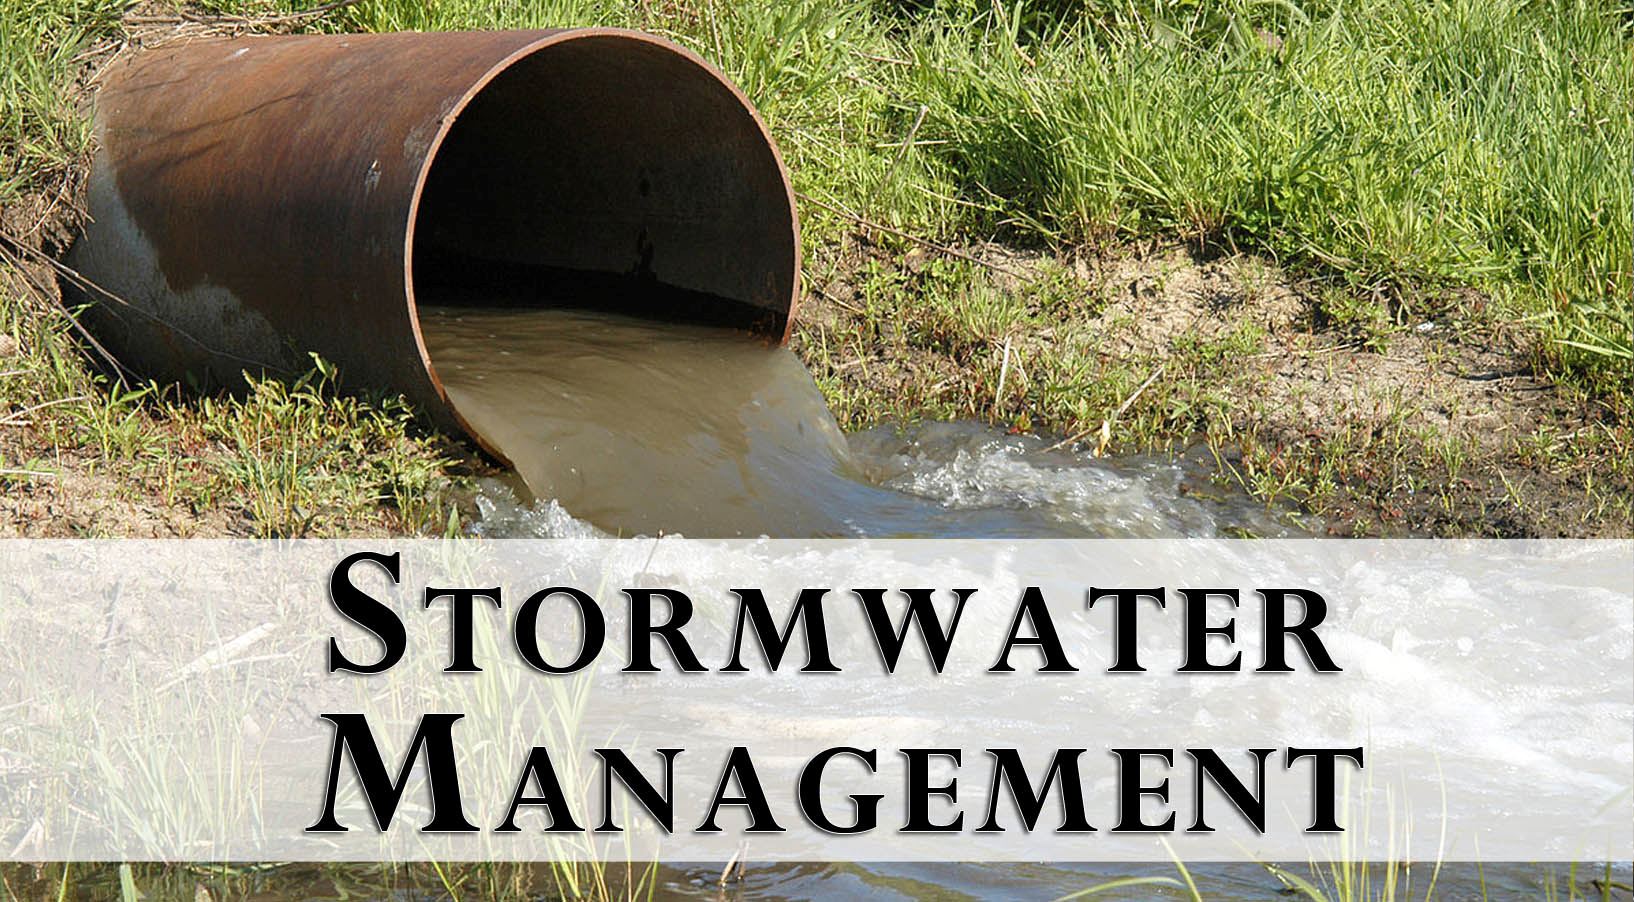 Stormwater Management - Design, Inspection and Operation,Maintenance of Stormwater Control Facilities